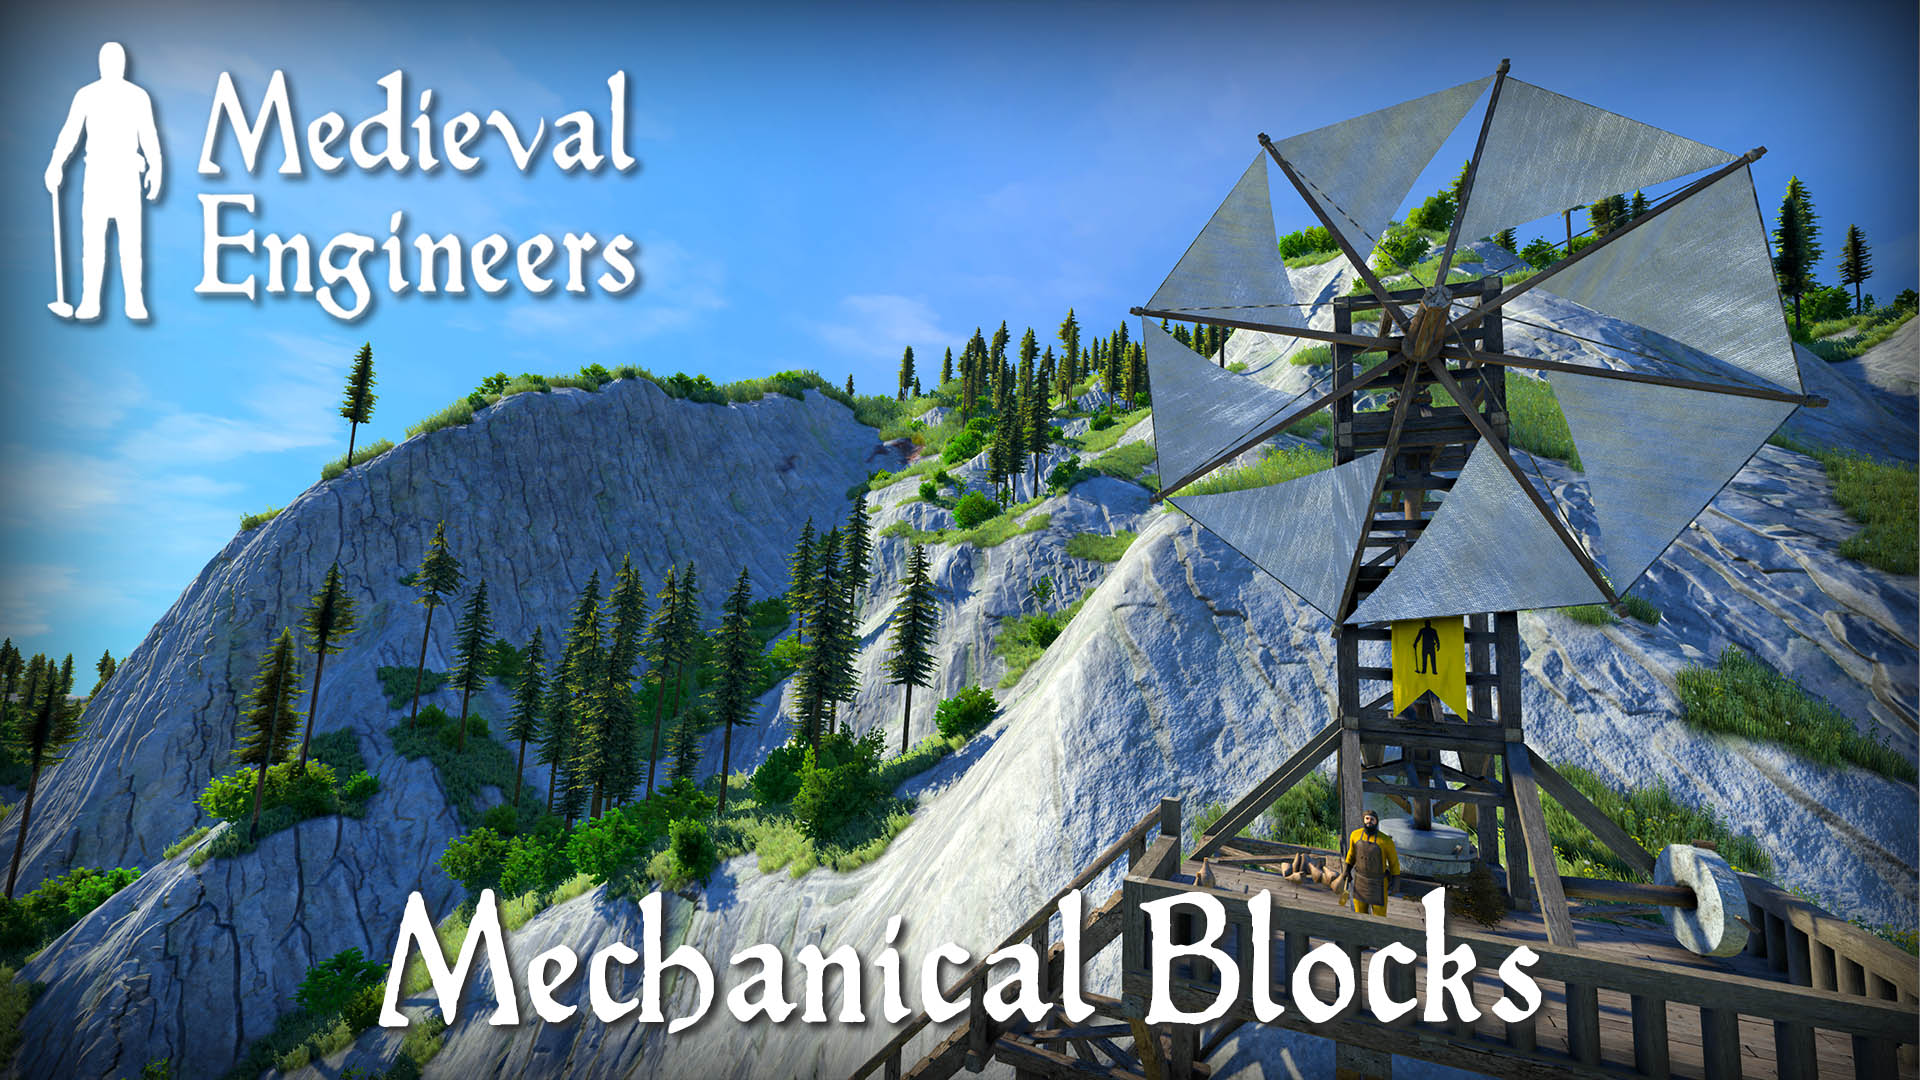 Feature Mech1 | Update 0.6 – Now With Mechanical Blocks!